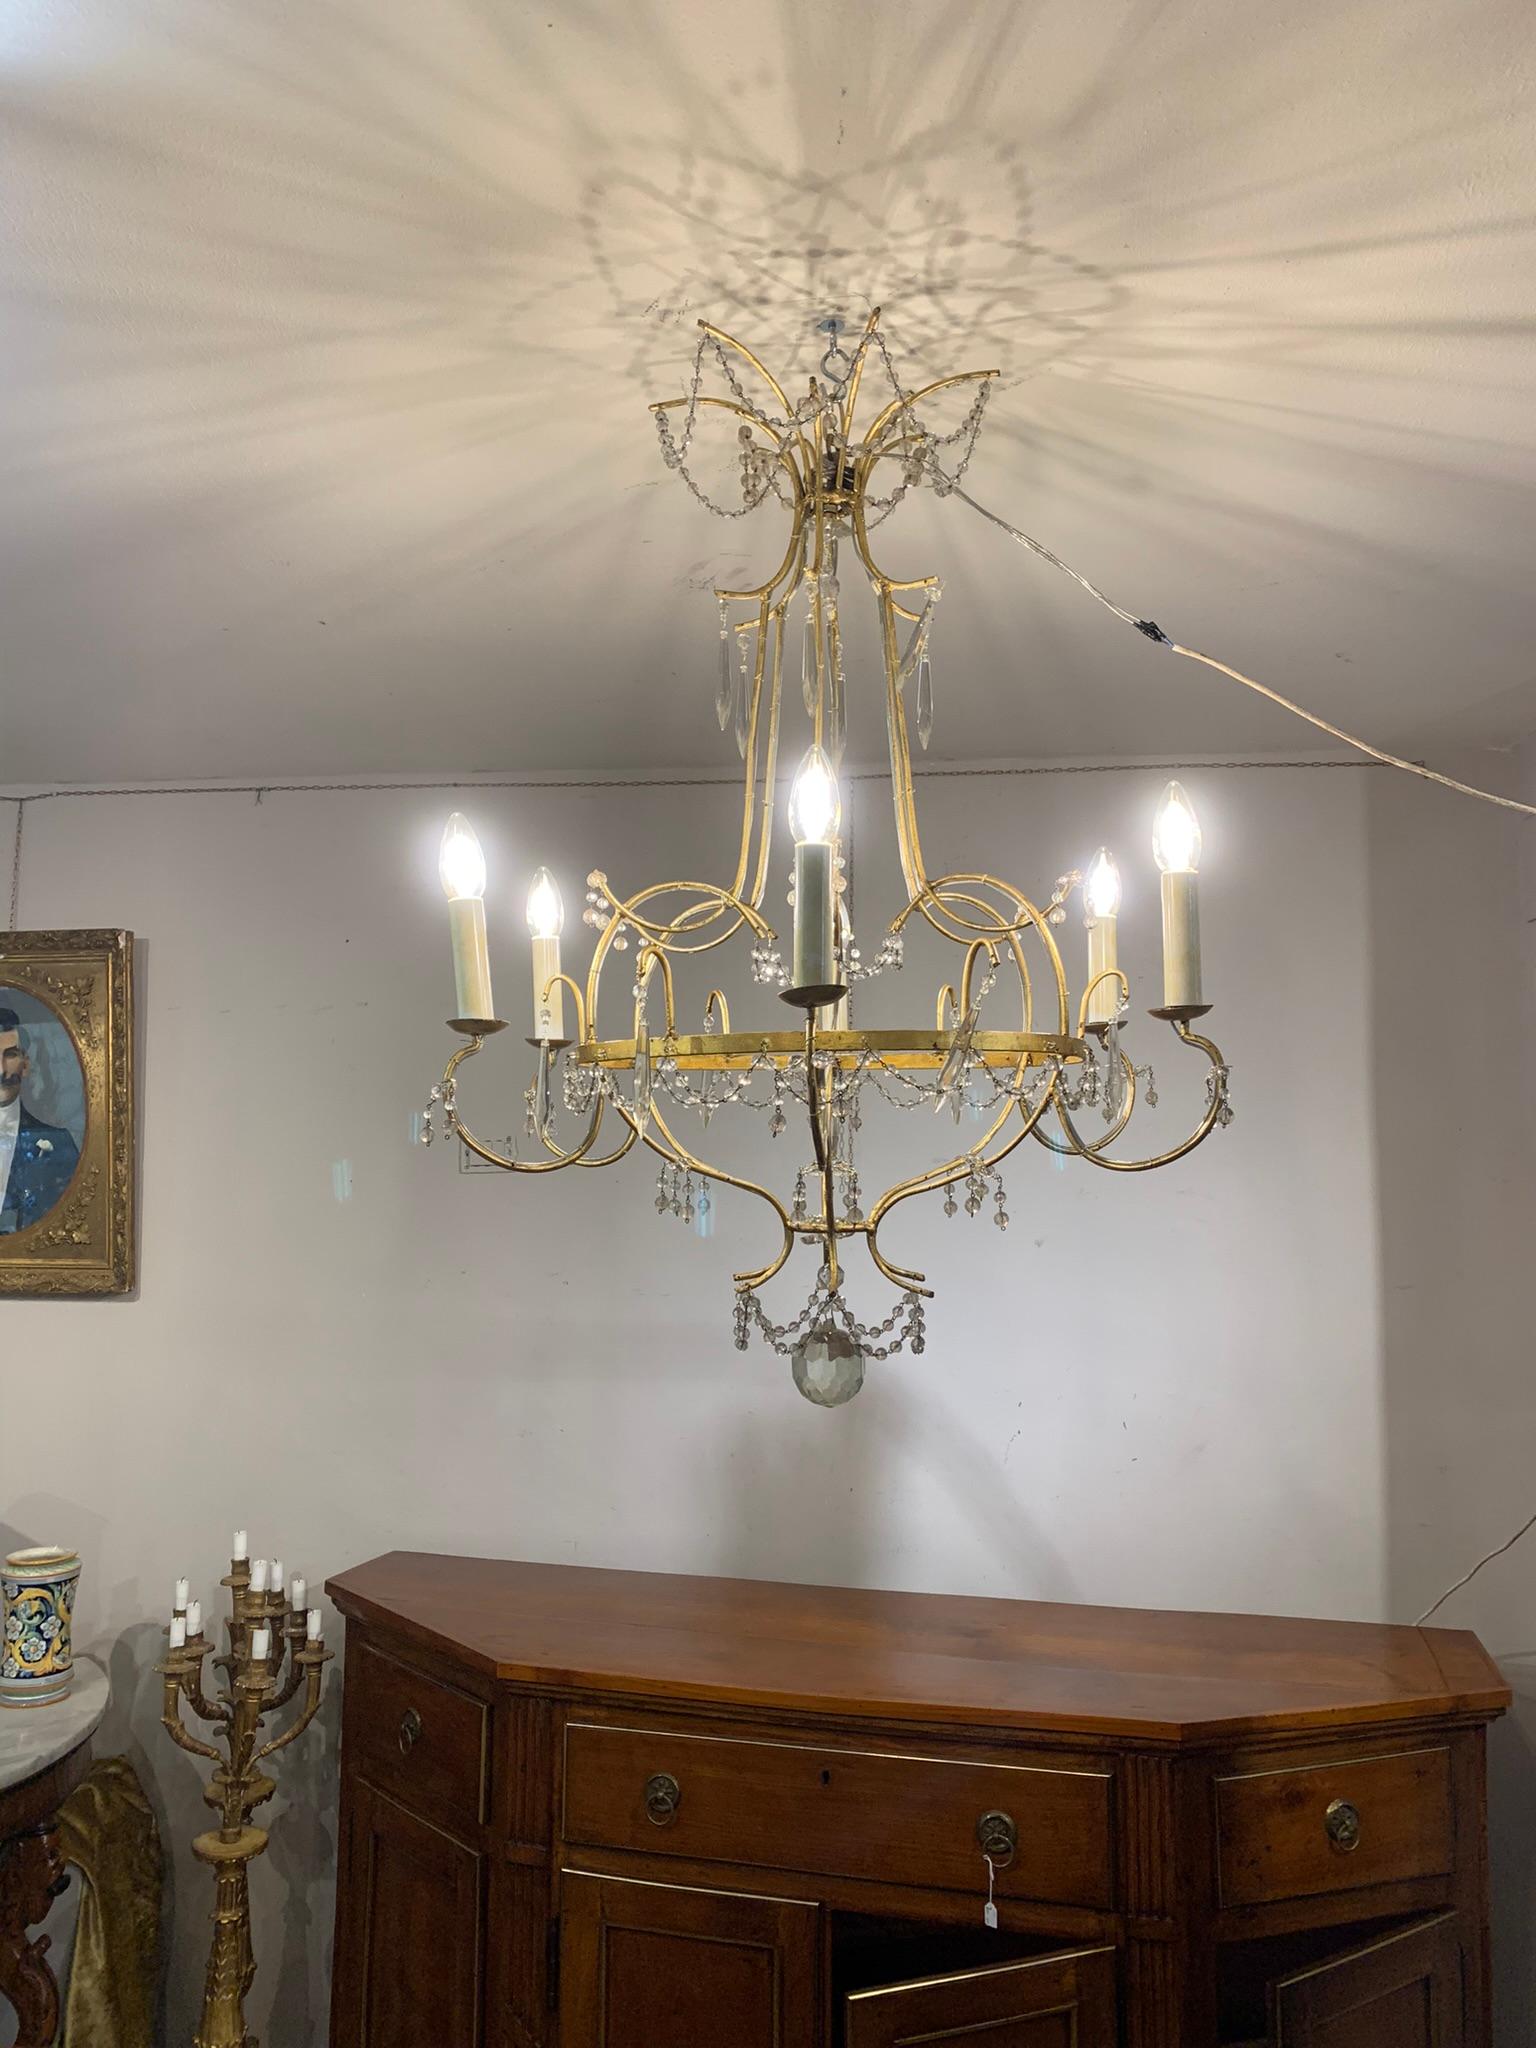 Beautiful chandelier with gilded iron structure and crystal pendants, six candle holder arms.
Very light and small in Size, suitable for rooms that are not too large.
MEASUREMENTS: H cm 90, Diameter cm 70.